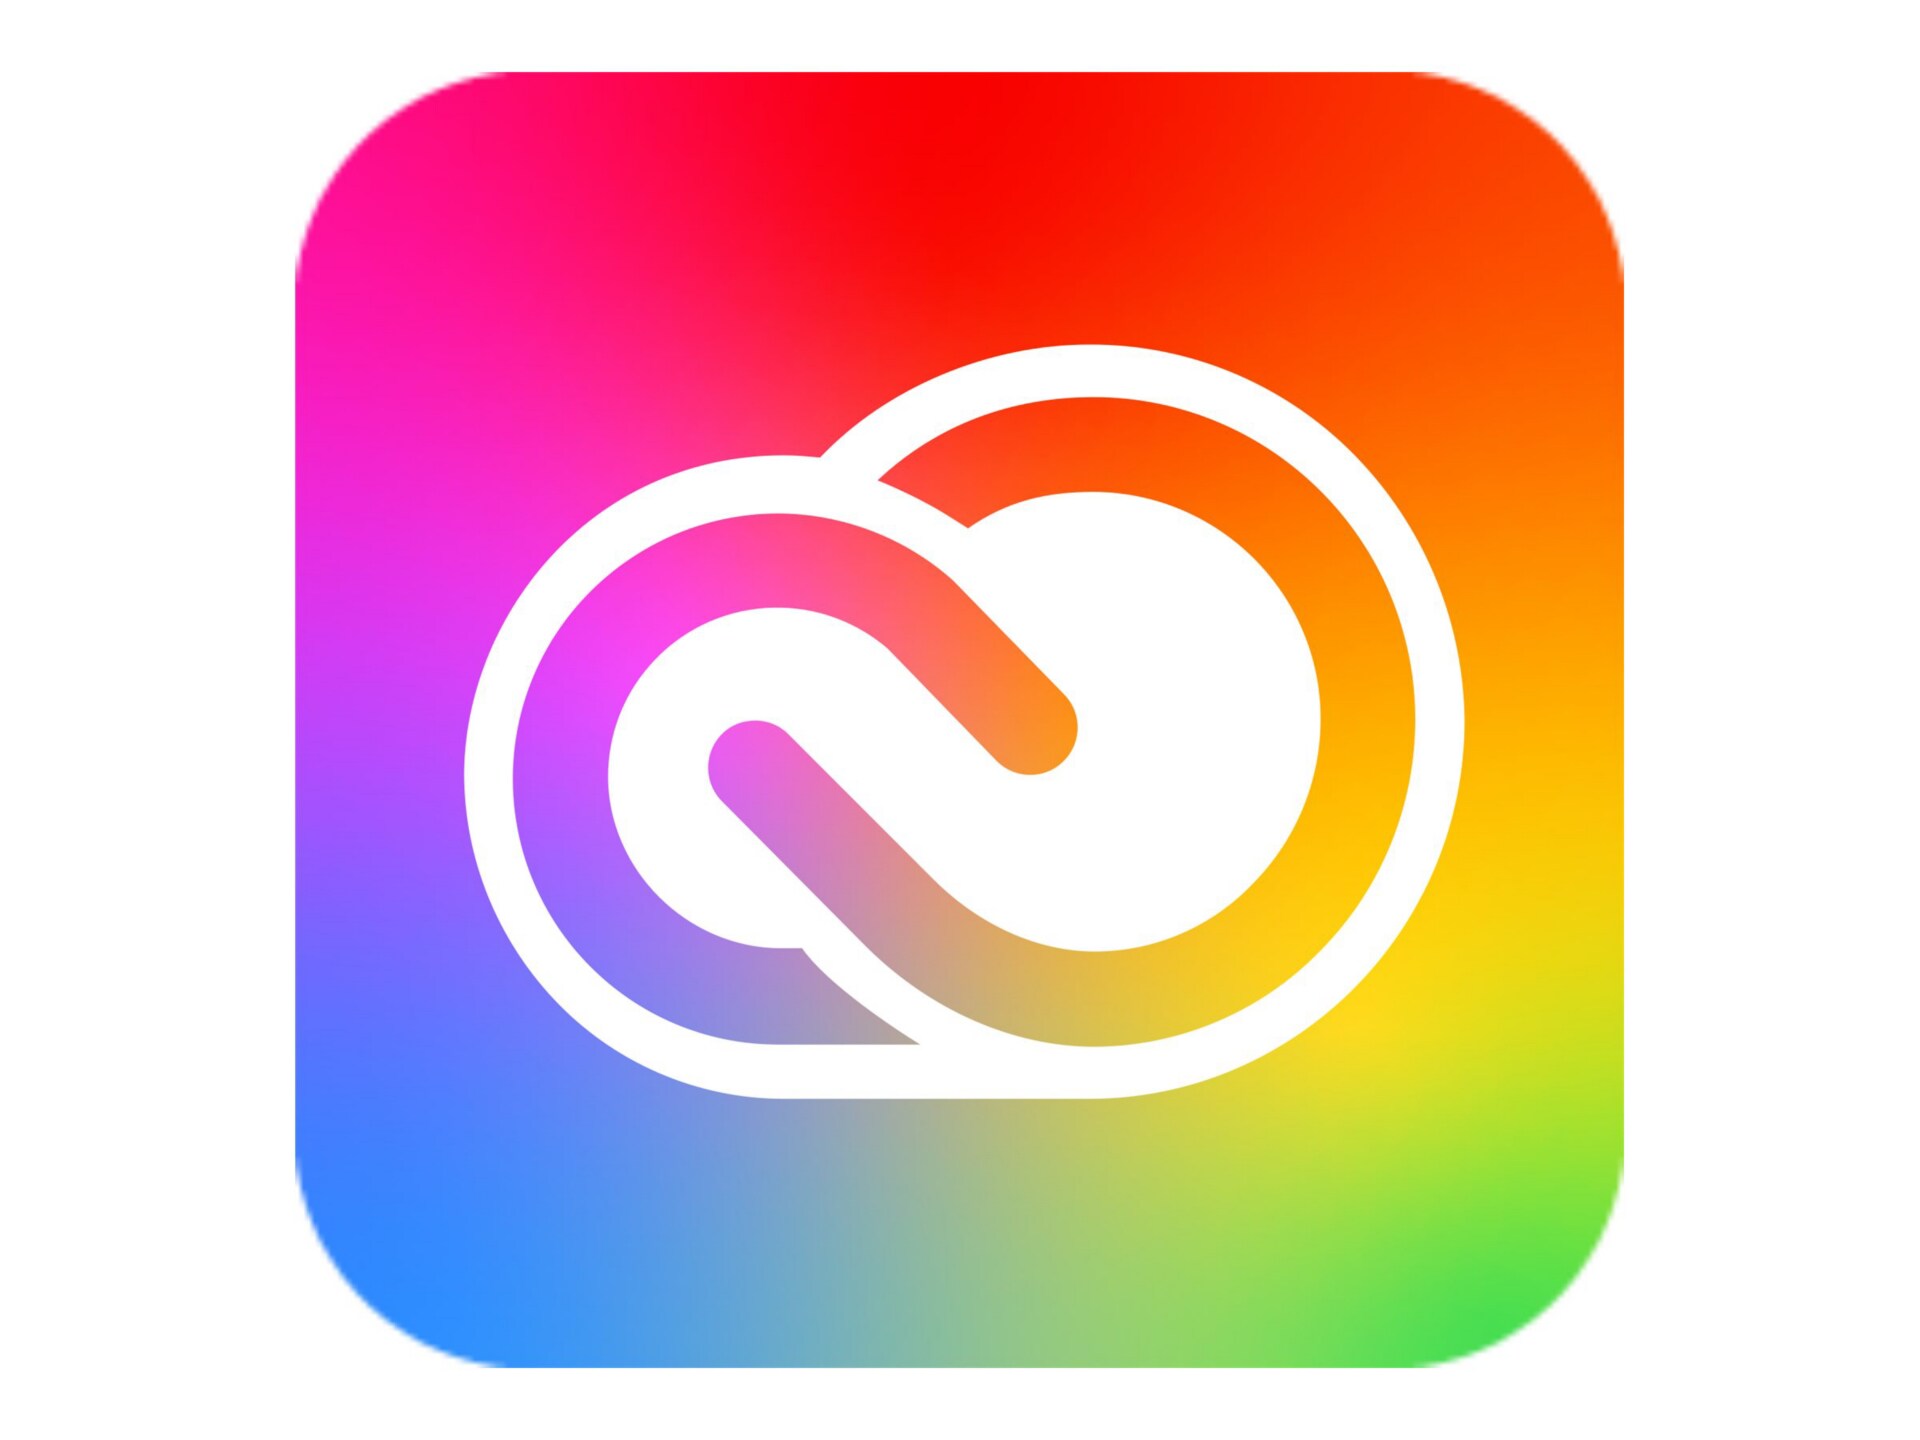 Adobe Creative Cloud for Enterprise - All Apps - Subscription New (9 months